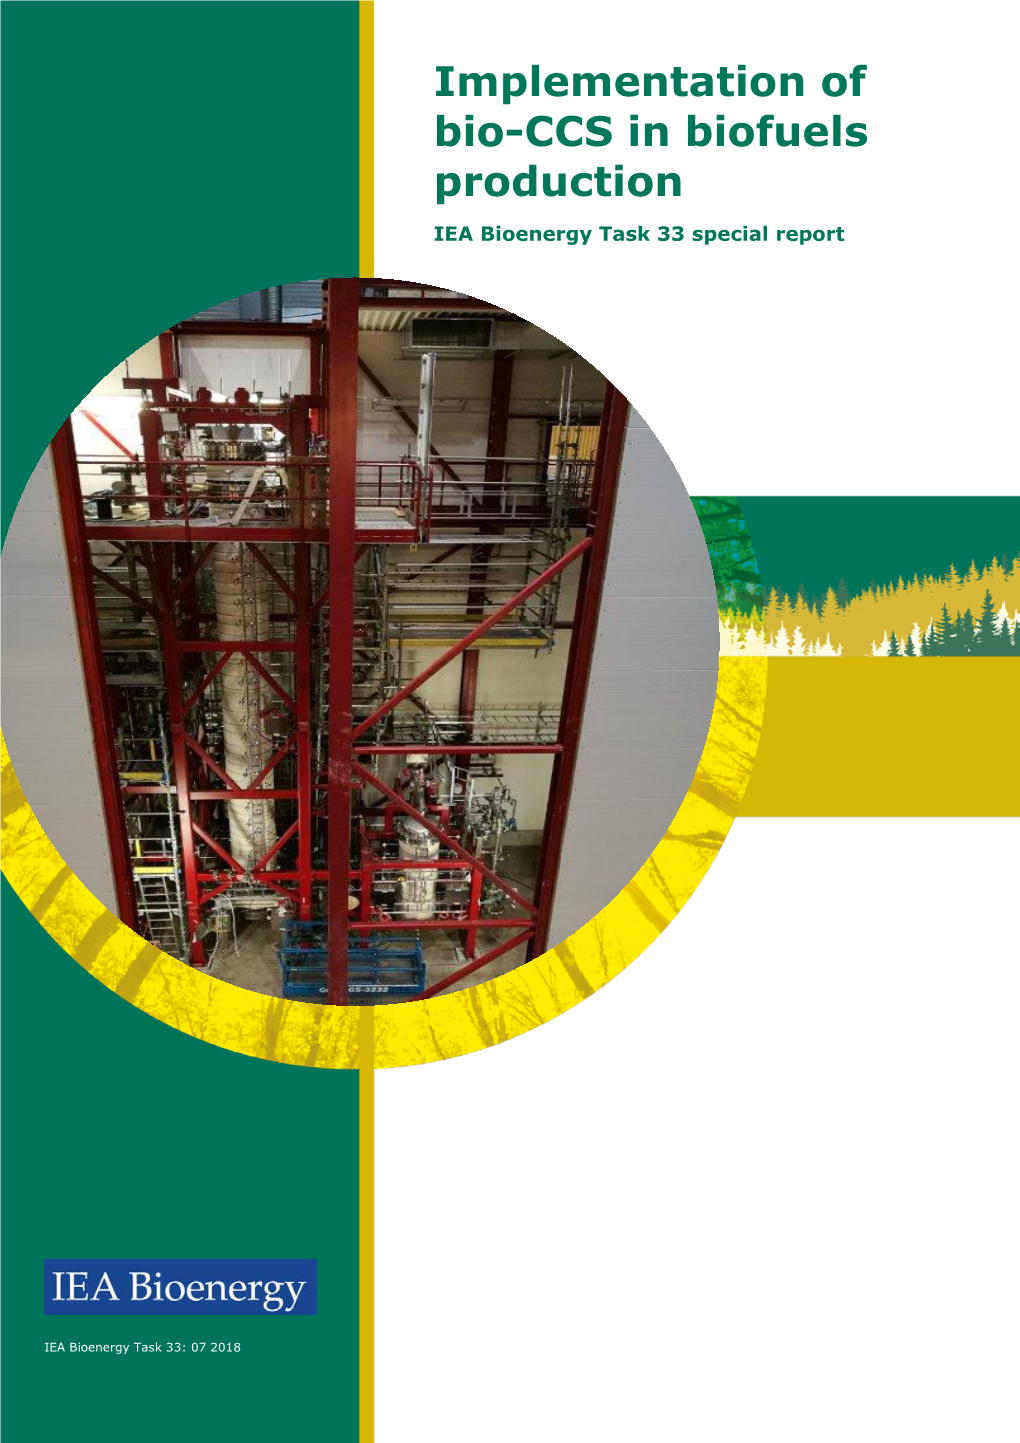 Implementation of Bio-CCS in Biofuels Production IEA Bioenergy Task 33 Special Report